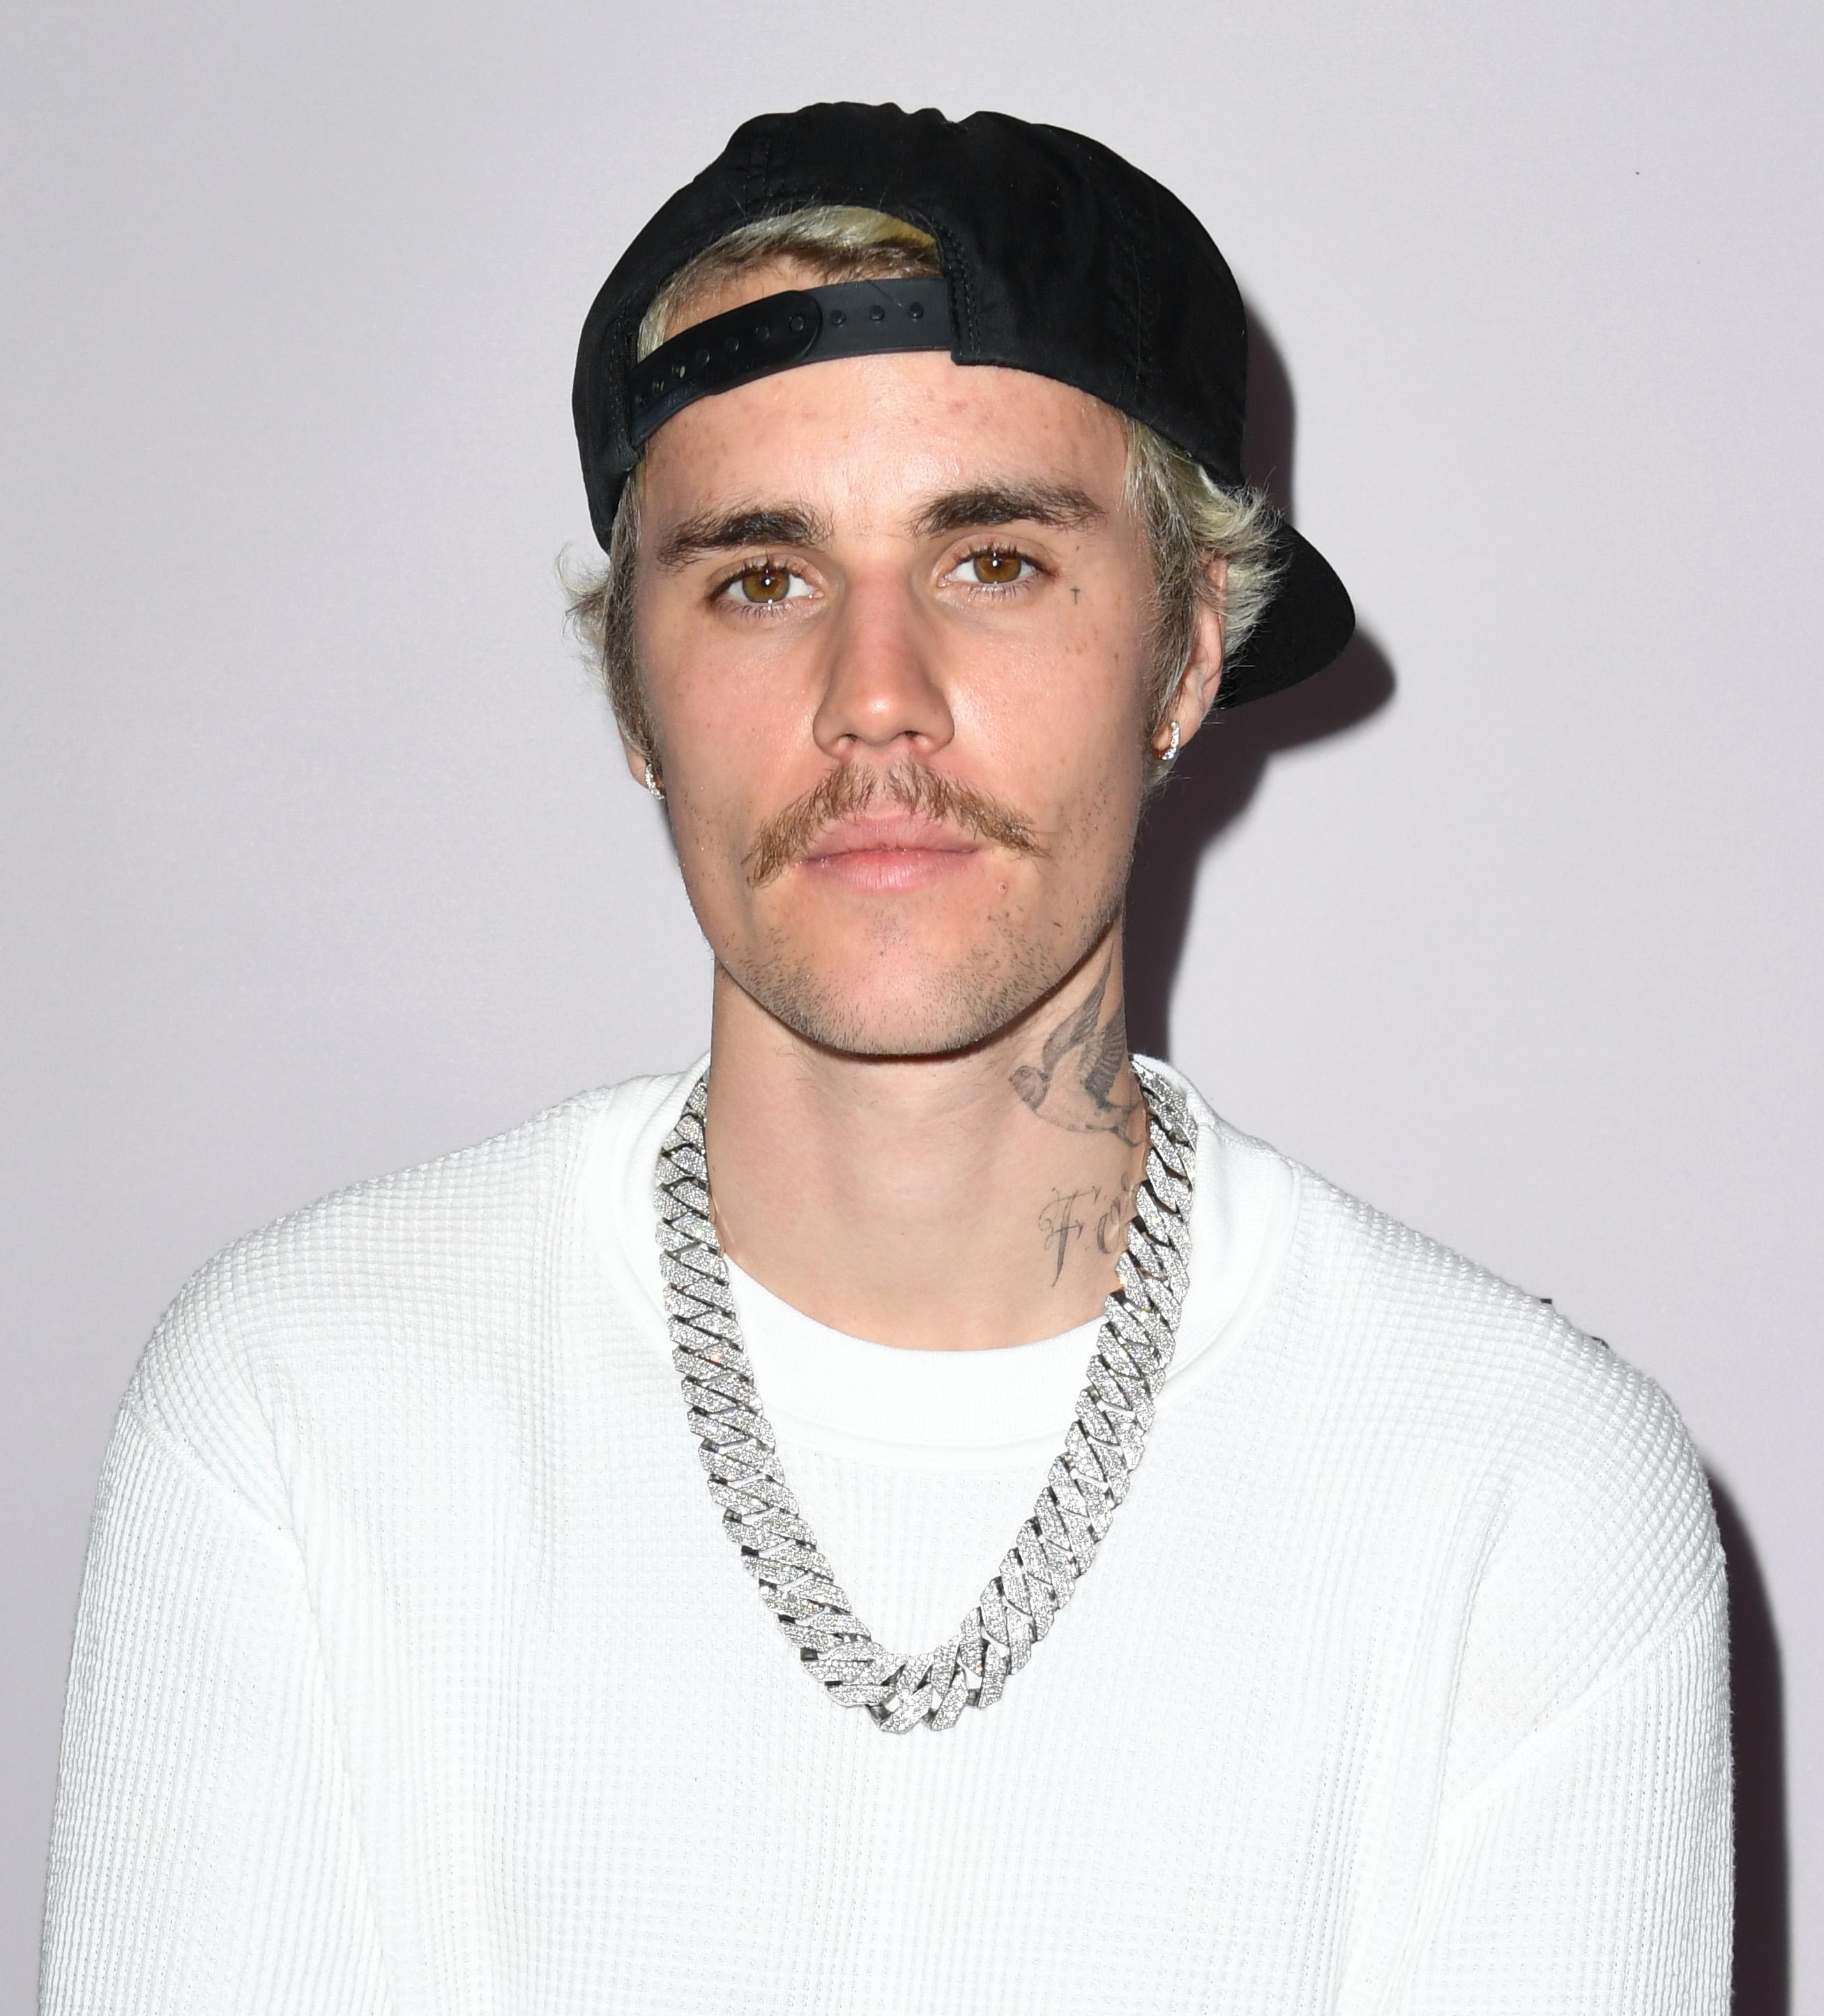 Justin Bieber Opens Up About His Tumultuous Relationship With Selena Gomez